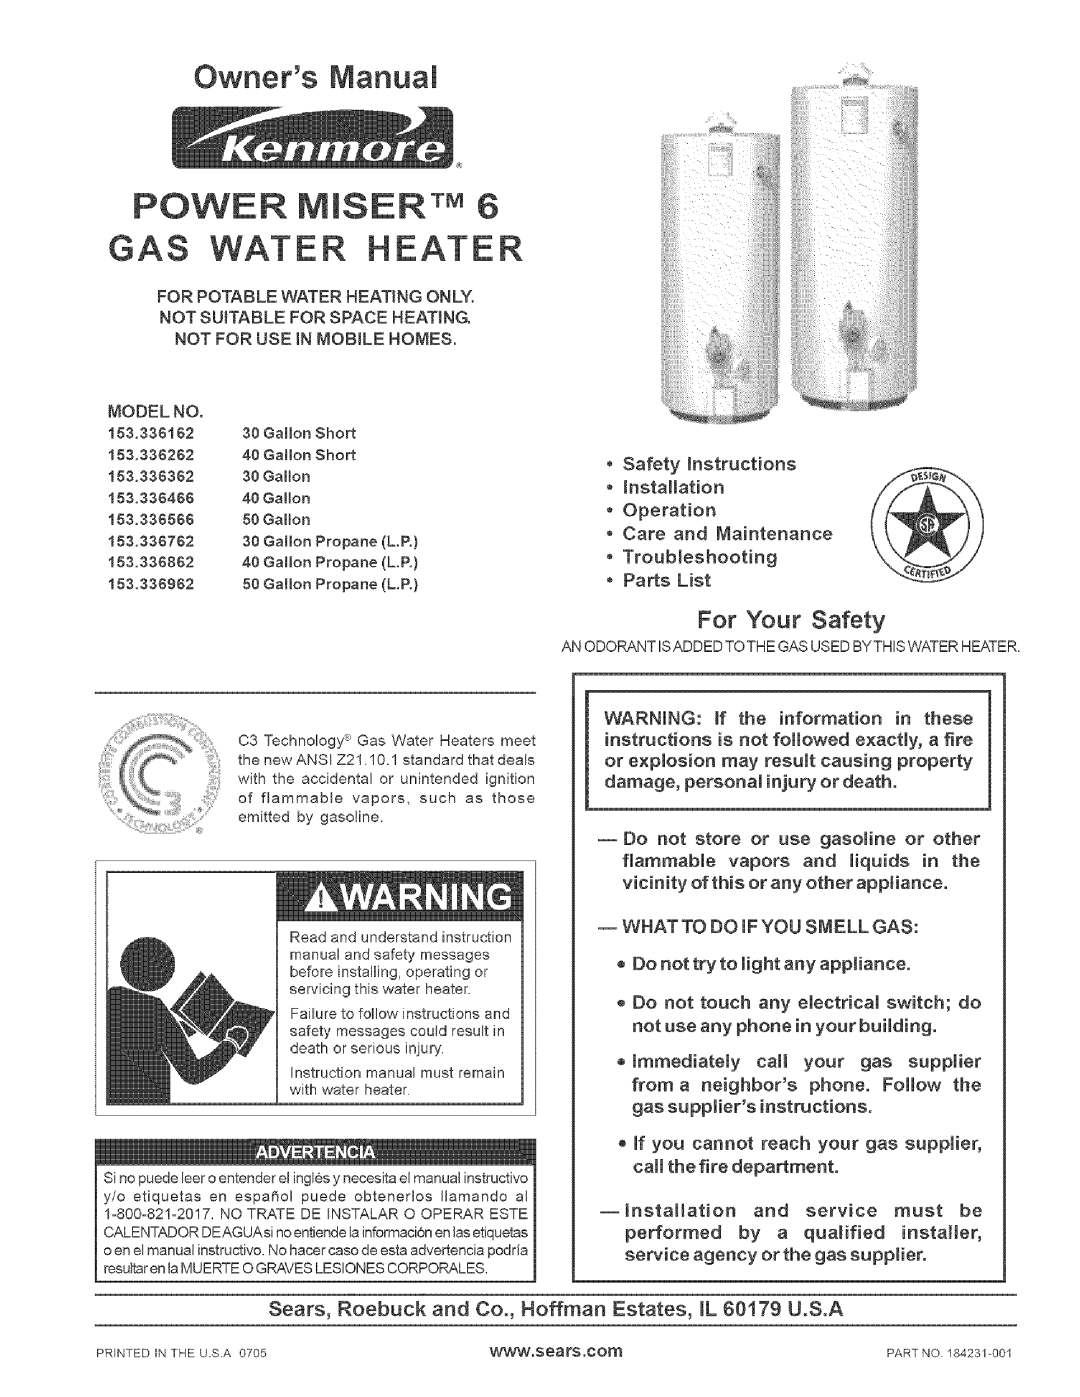 Kenmore 153336762, 153.336262, 153336566 owner manual For Your Safety, POWER MISERTM 6 GAS WATER HEATER, Owners Manual 